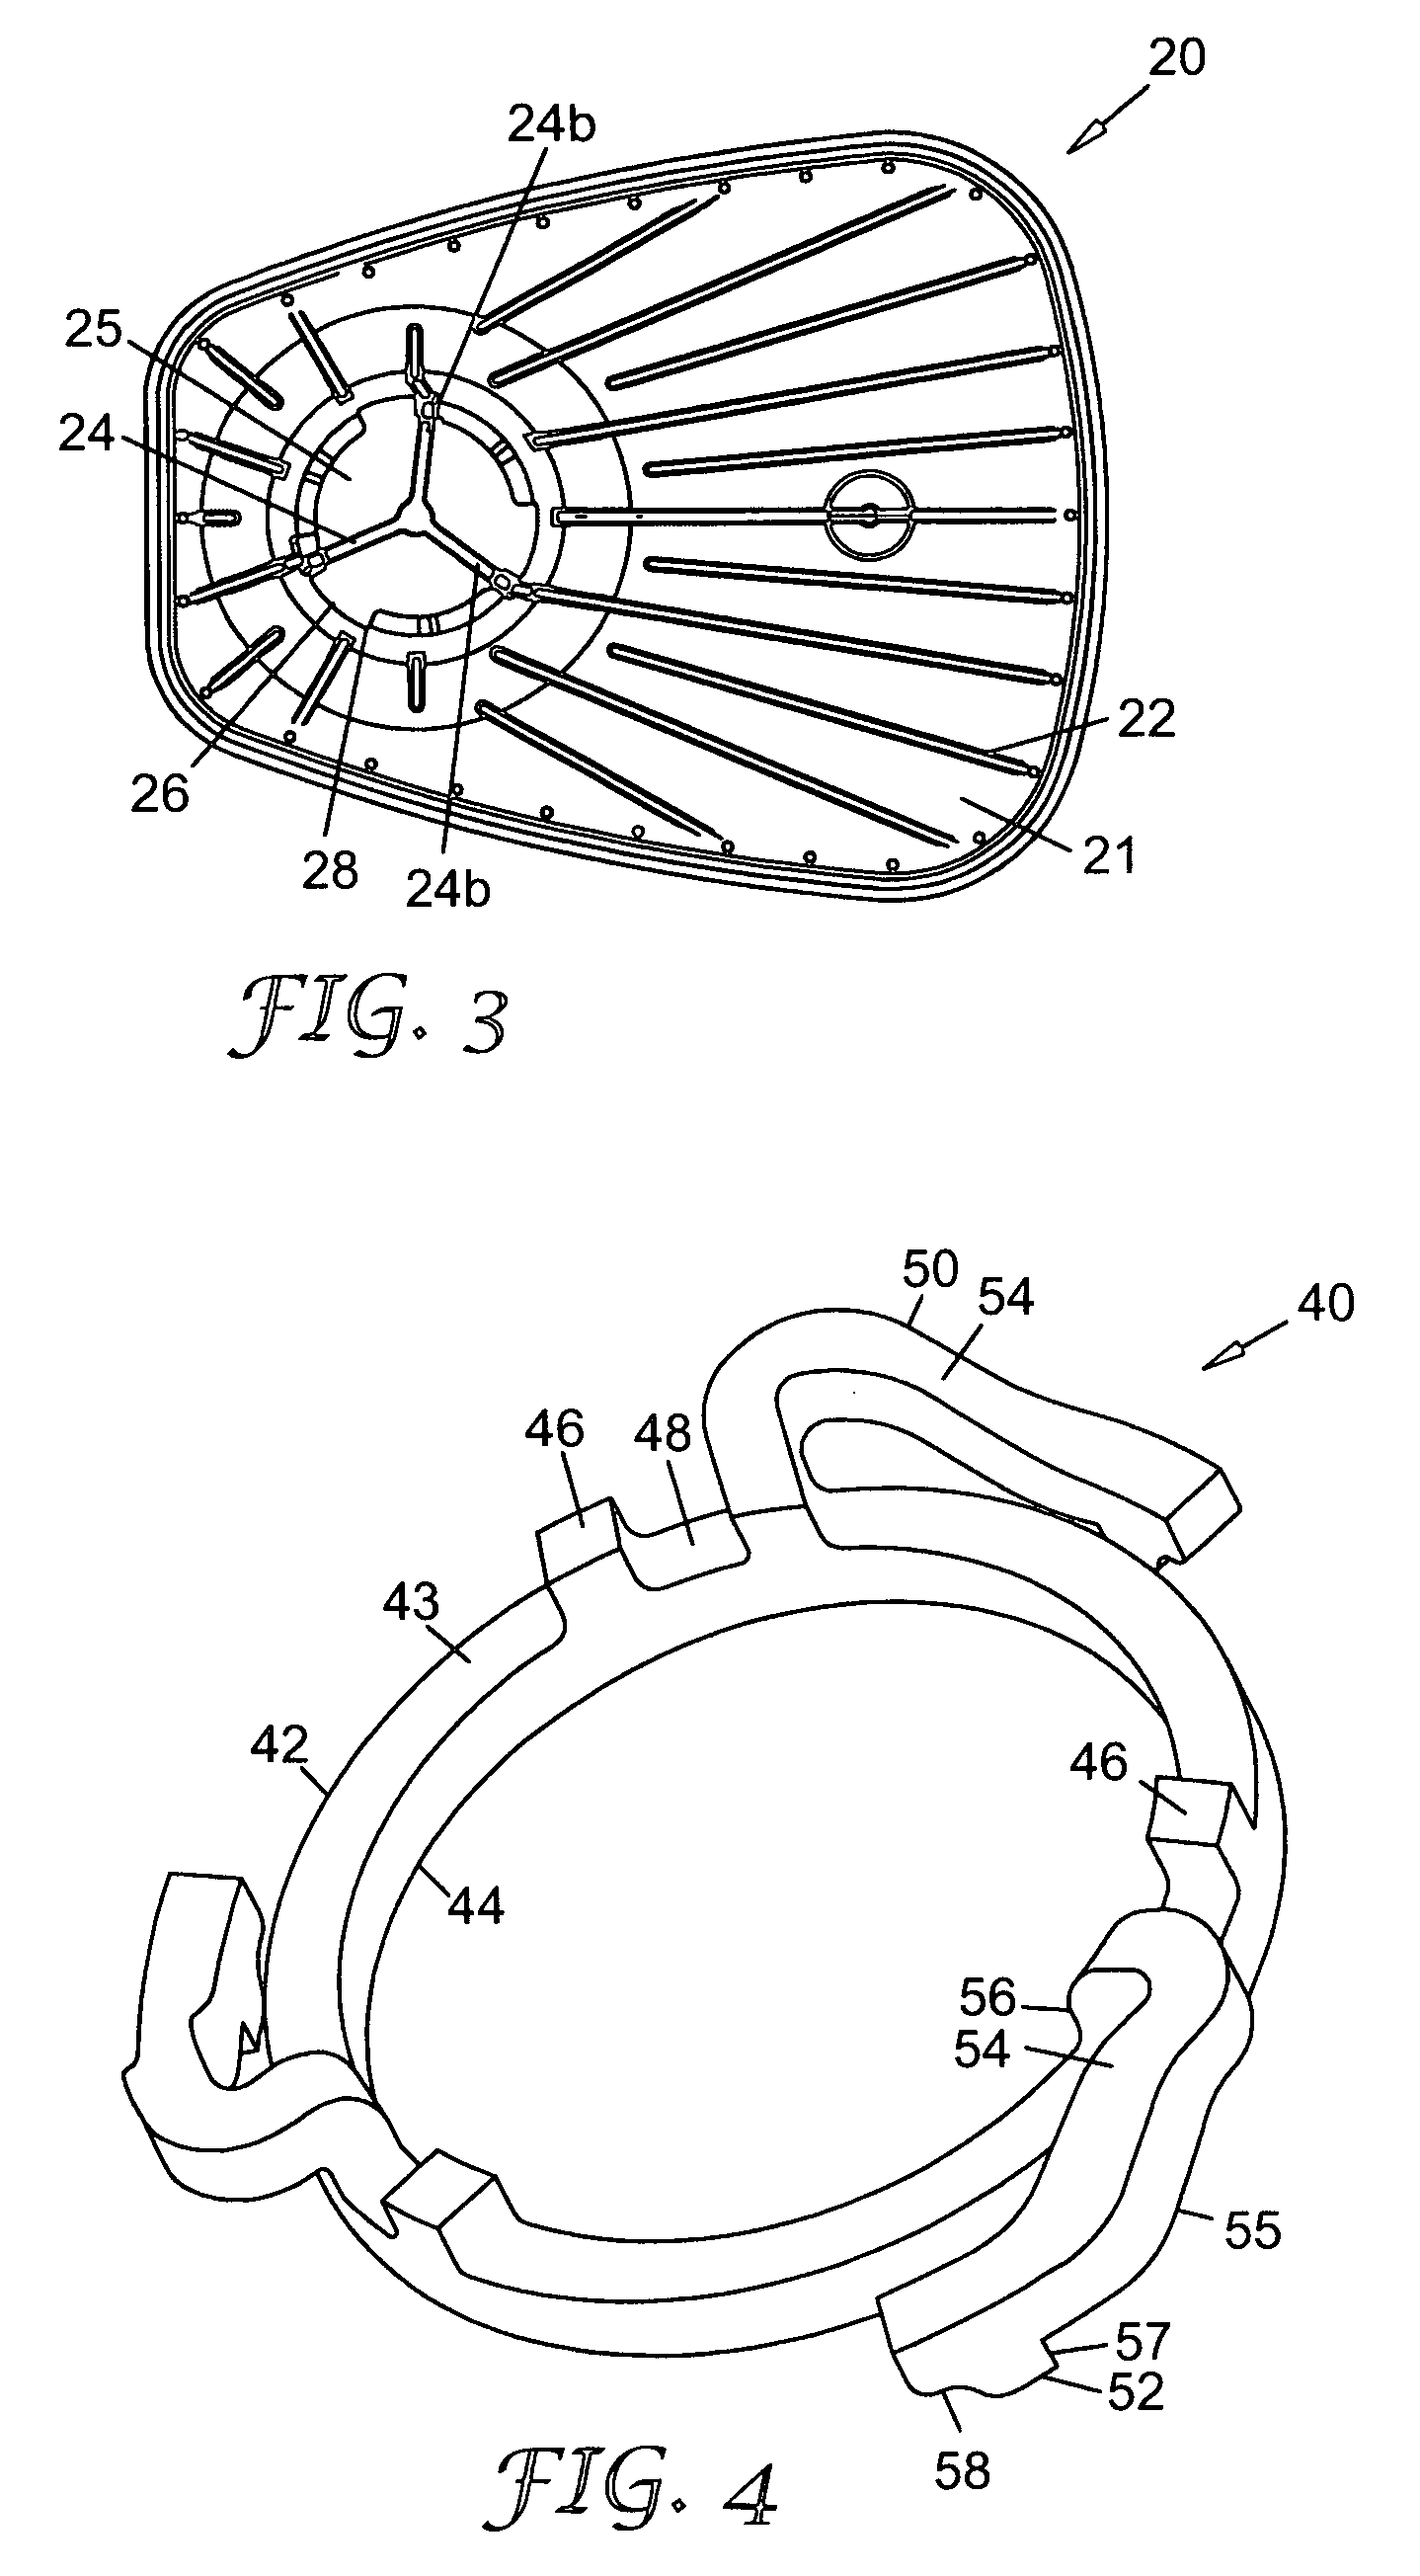 Personal respiratory protection device that has a permanent or semi-permanent bayonet connection